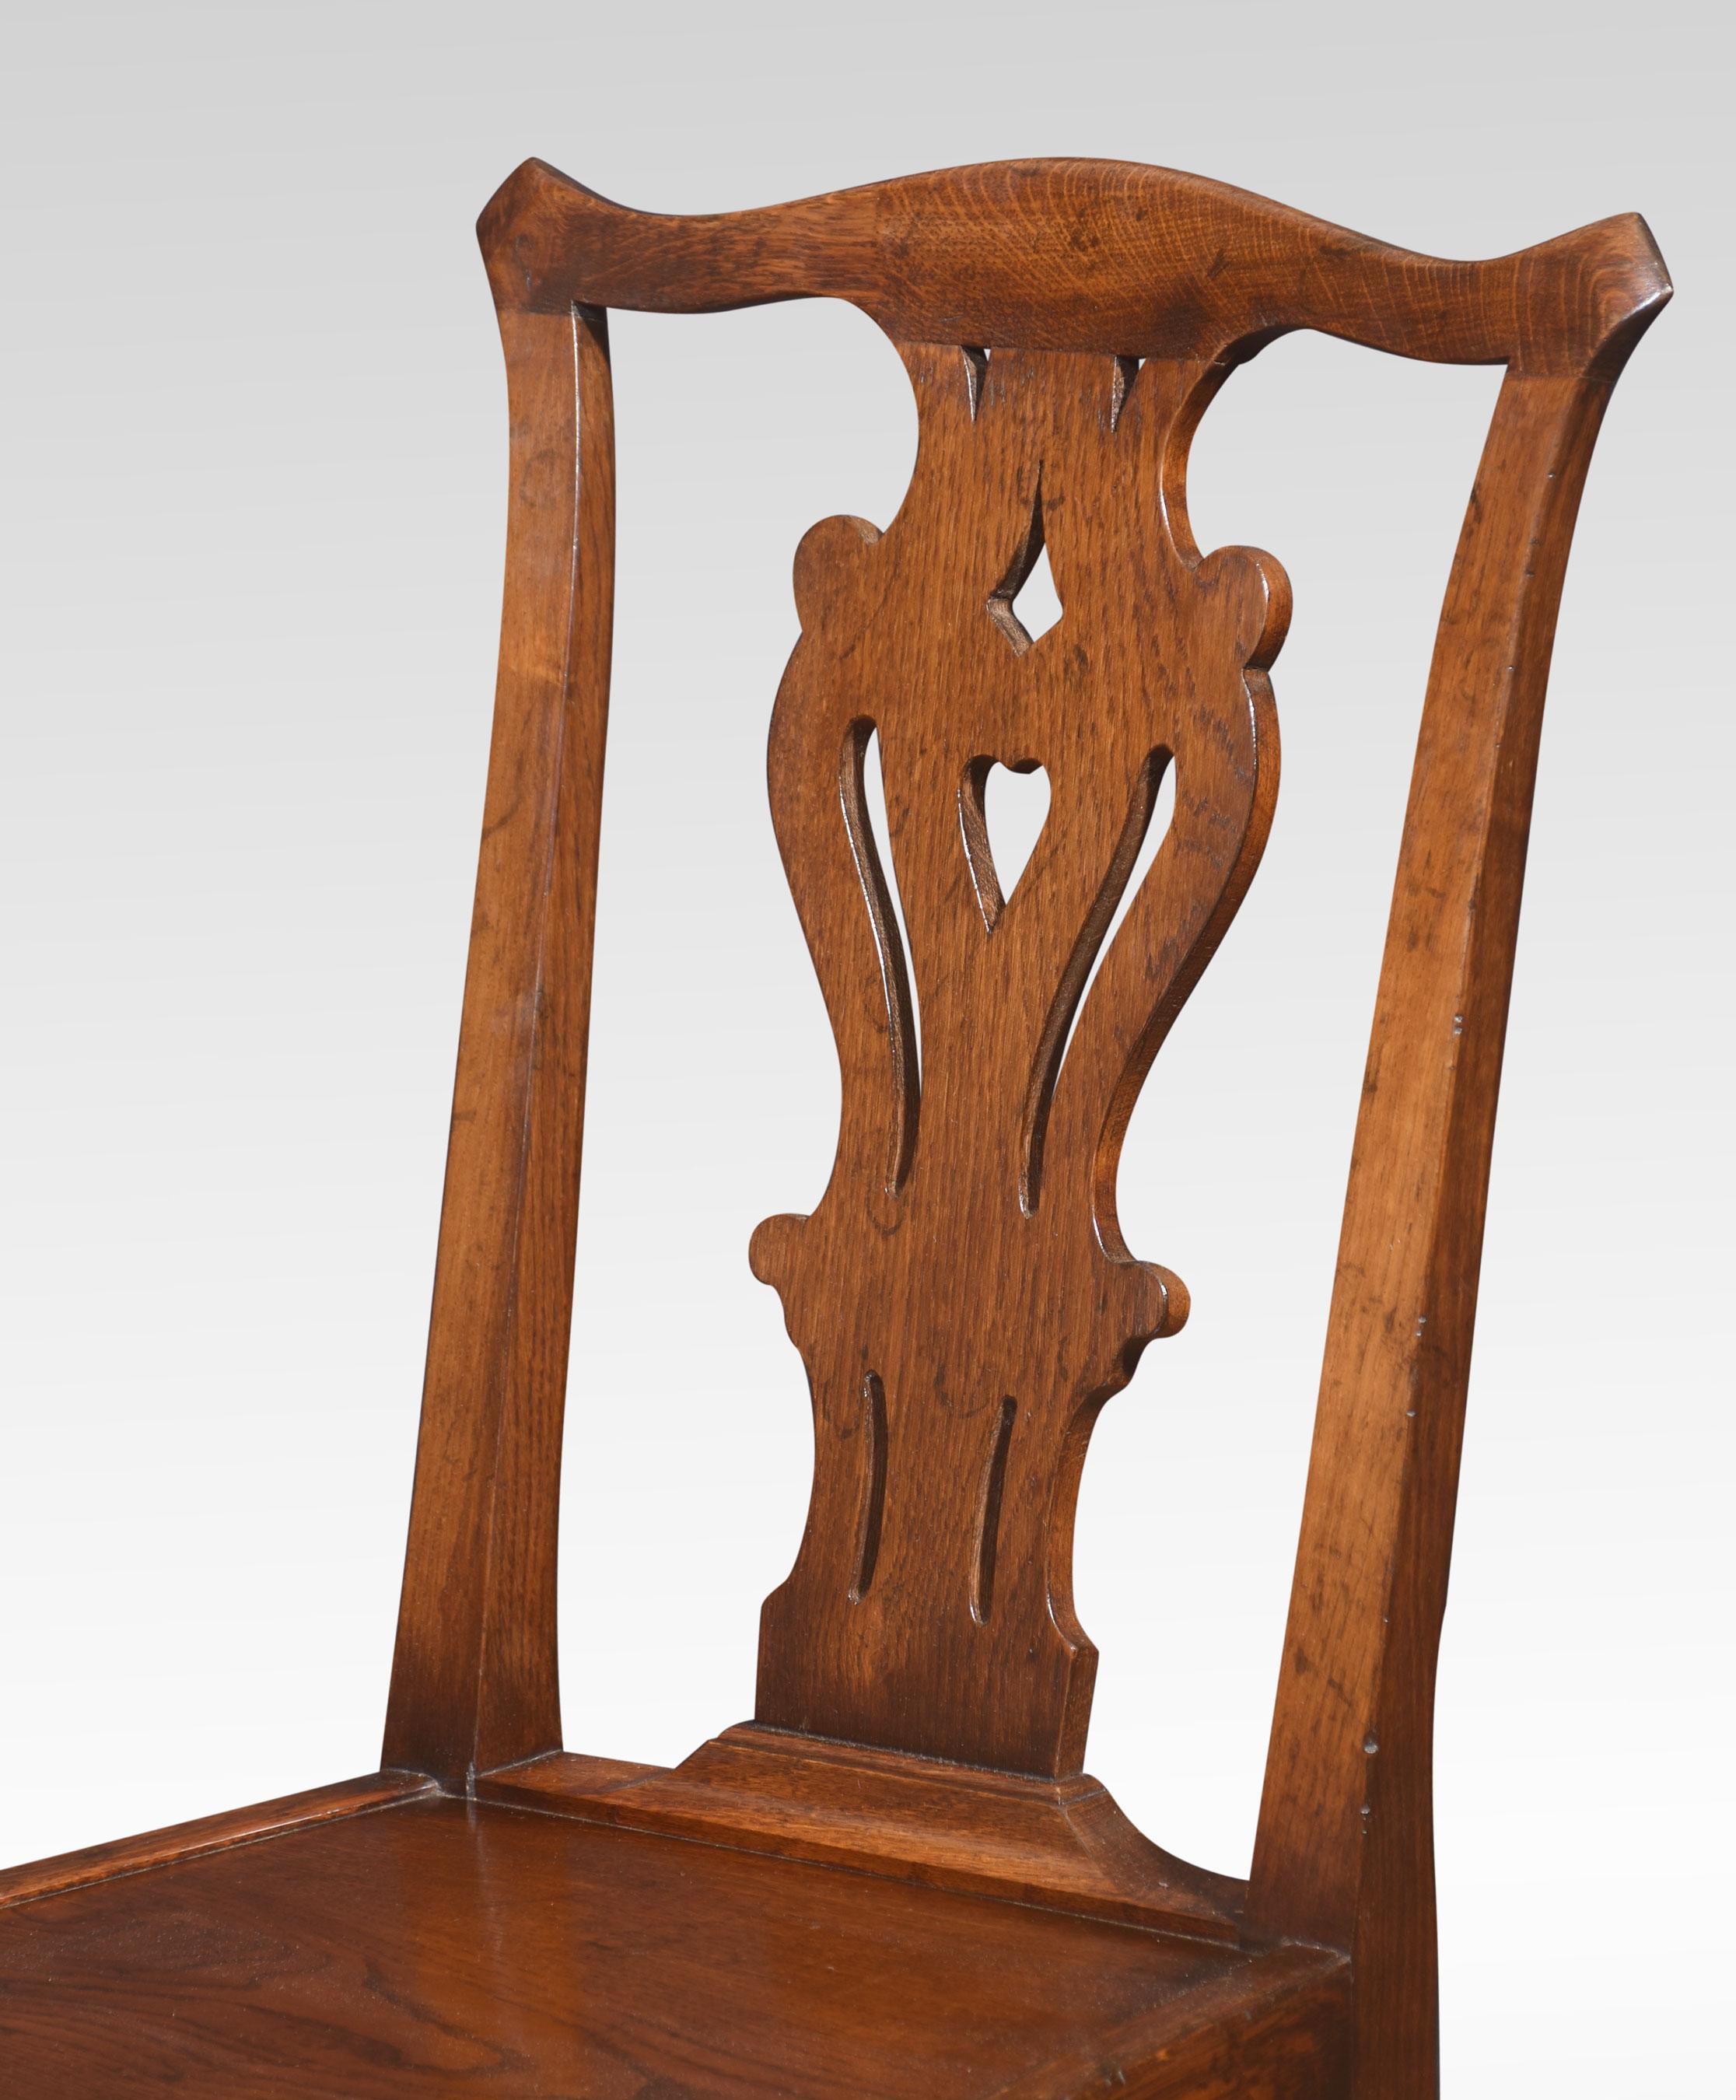 Set of six oak dining chairs, of 18th-century design having shaped top rail above-pierced splat backs. To the solid oak seats on chamfered and stretchered supports.
Dimensions
Height 38.5 Inches height to seat 18 Inches
Width 19.5 Inches
Depth 19